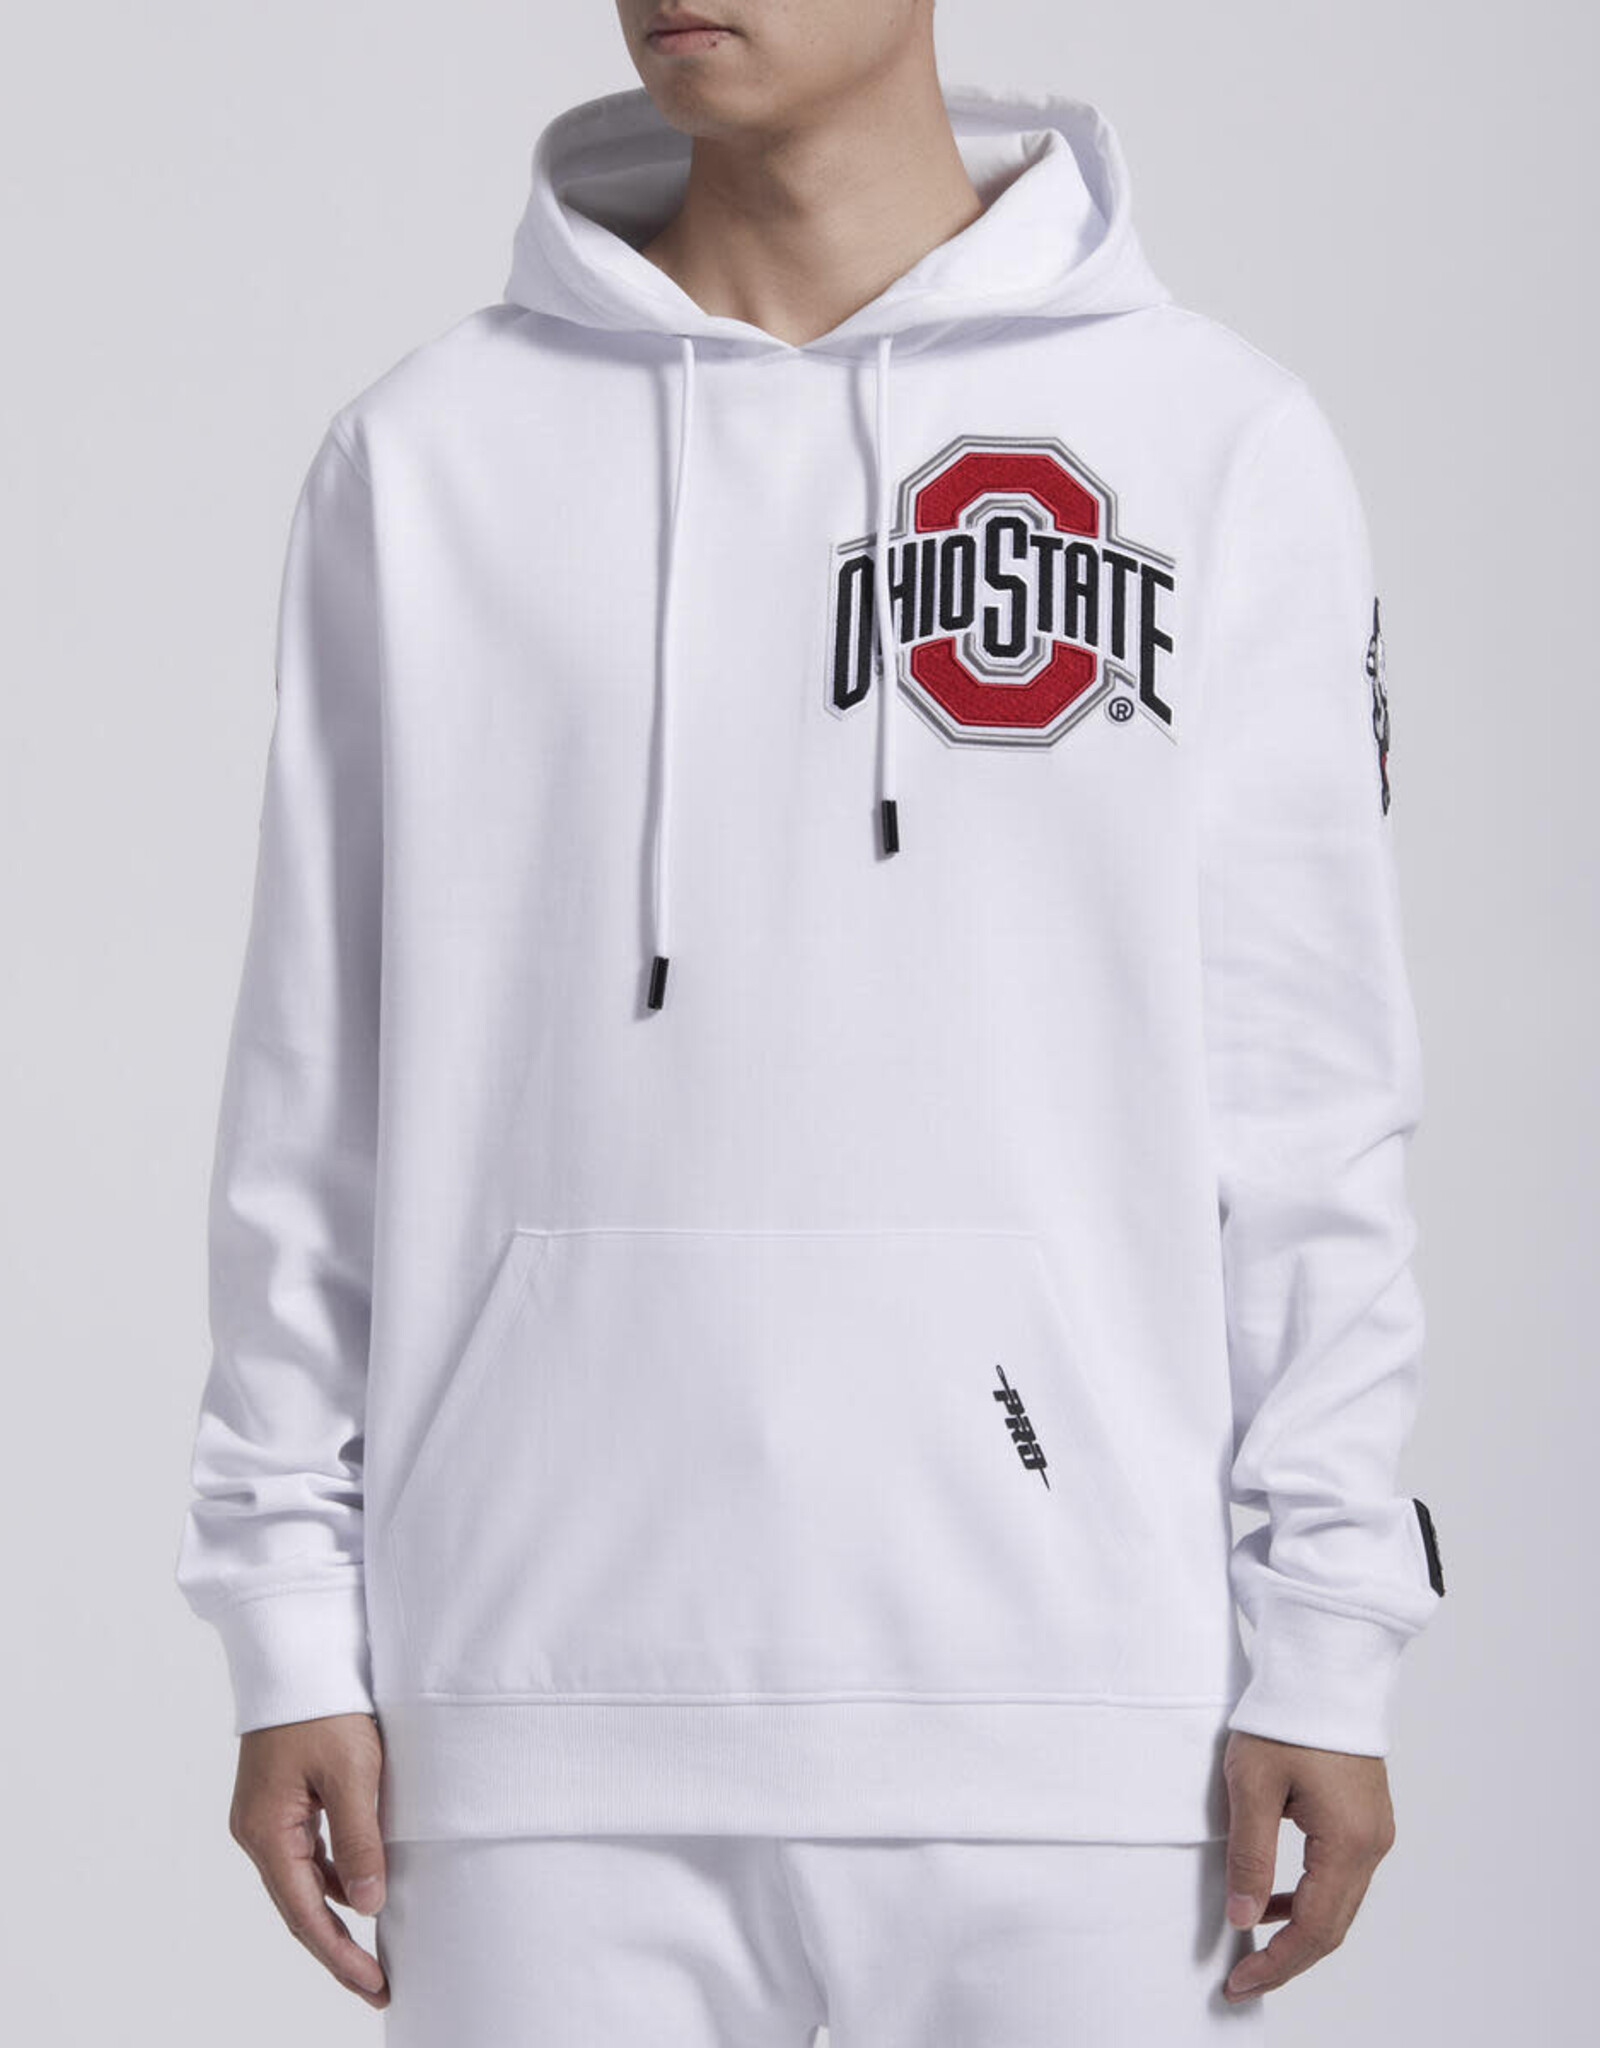 Pro Standard Ohio State Buckeyes Men's Classic Stacked Logo Pullover Hoodie